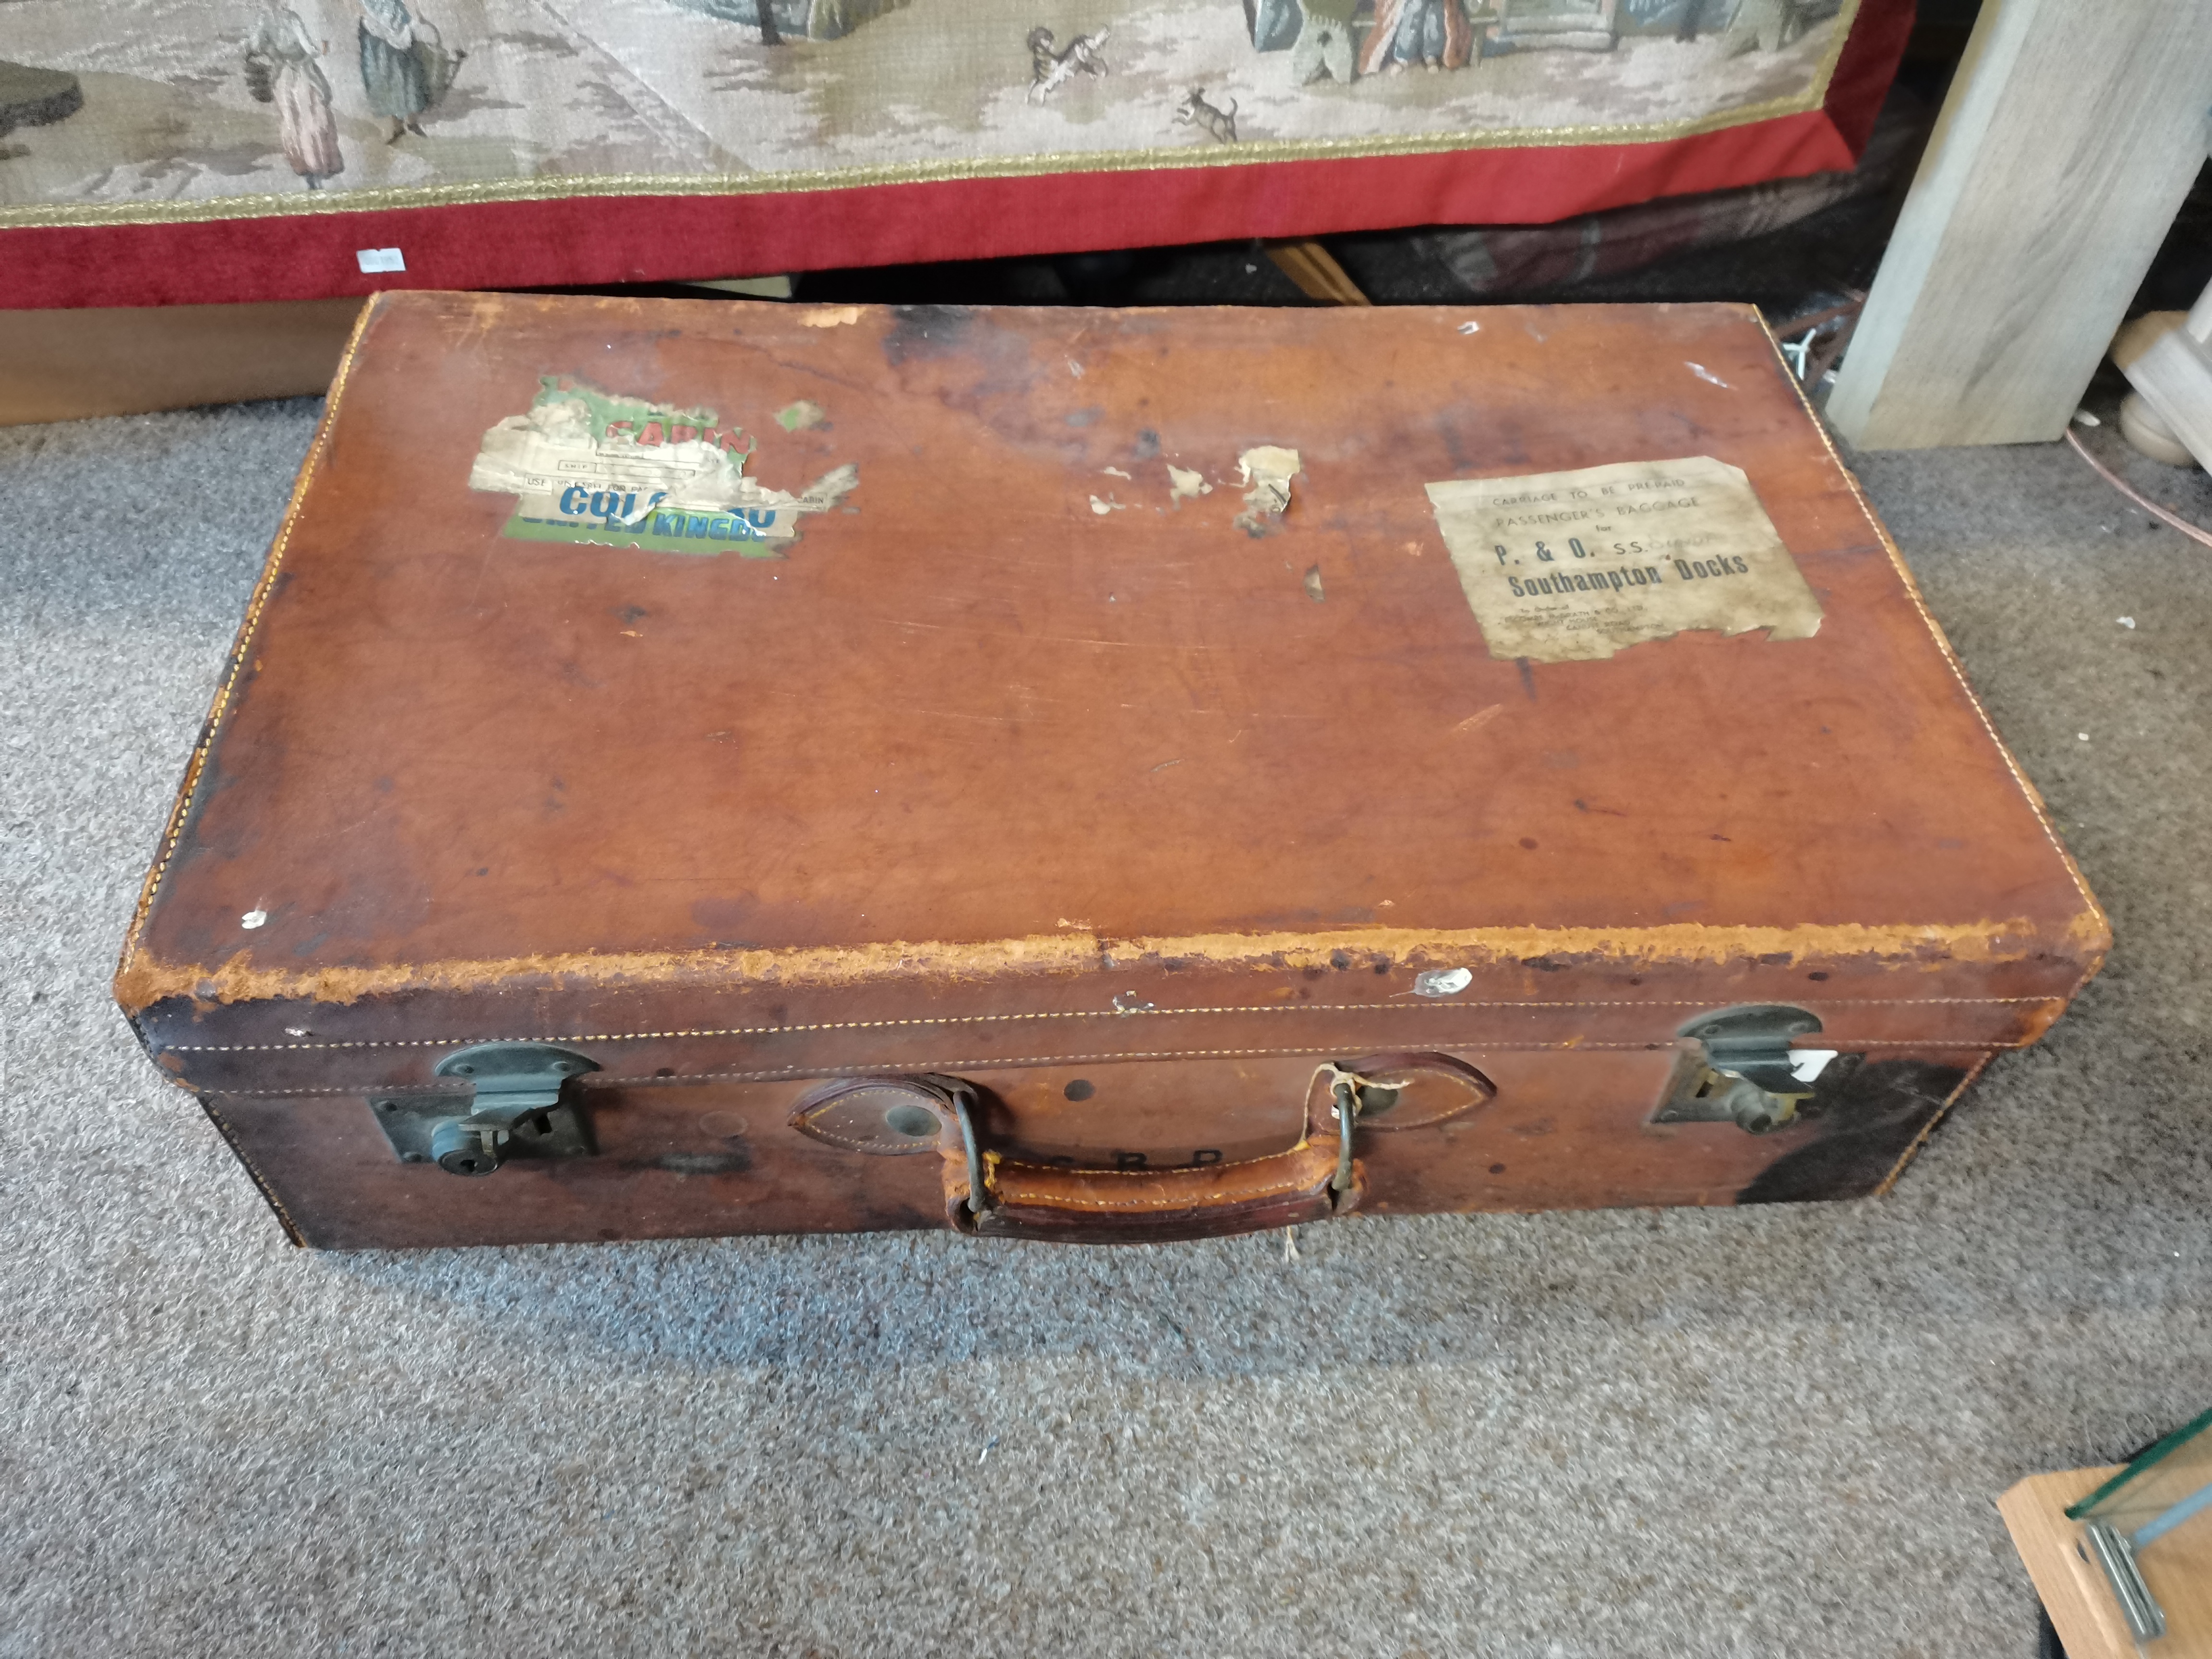 Suitcase - Bought from Harrods belonged to Tom Peak (of Peak Freans biscuits) - Image 2 of 2